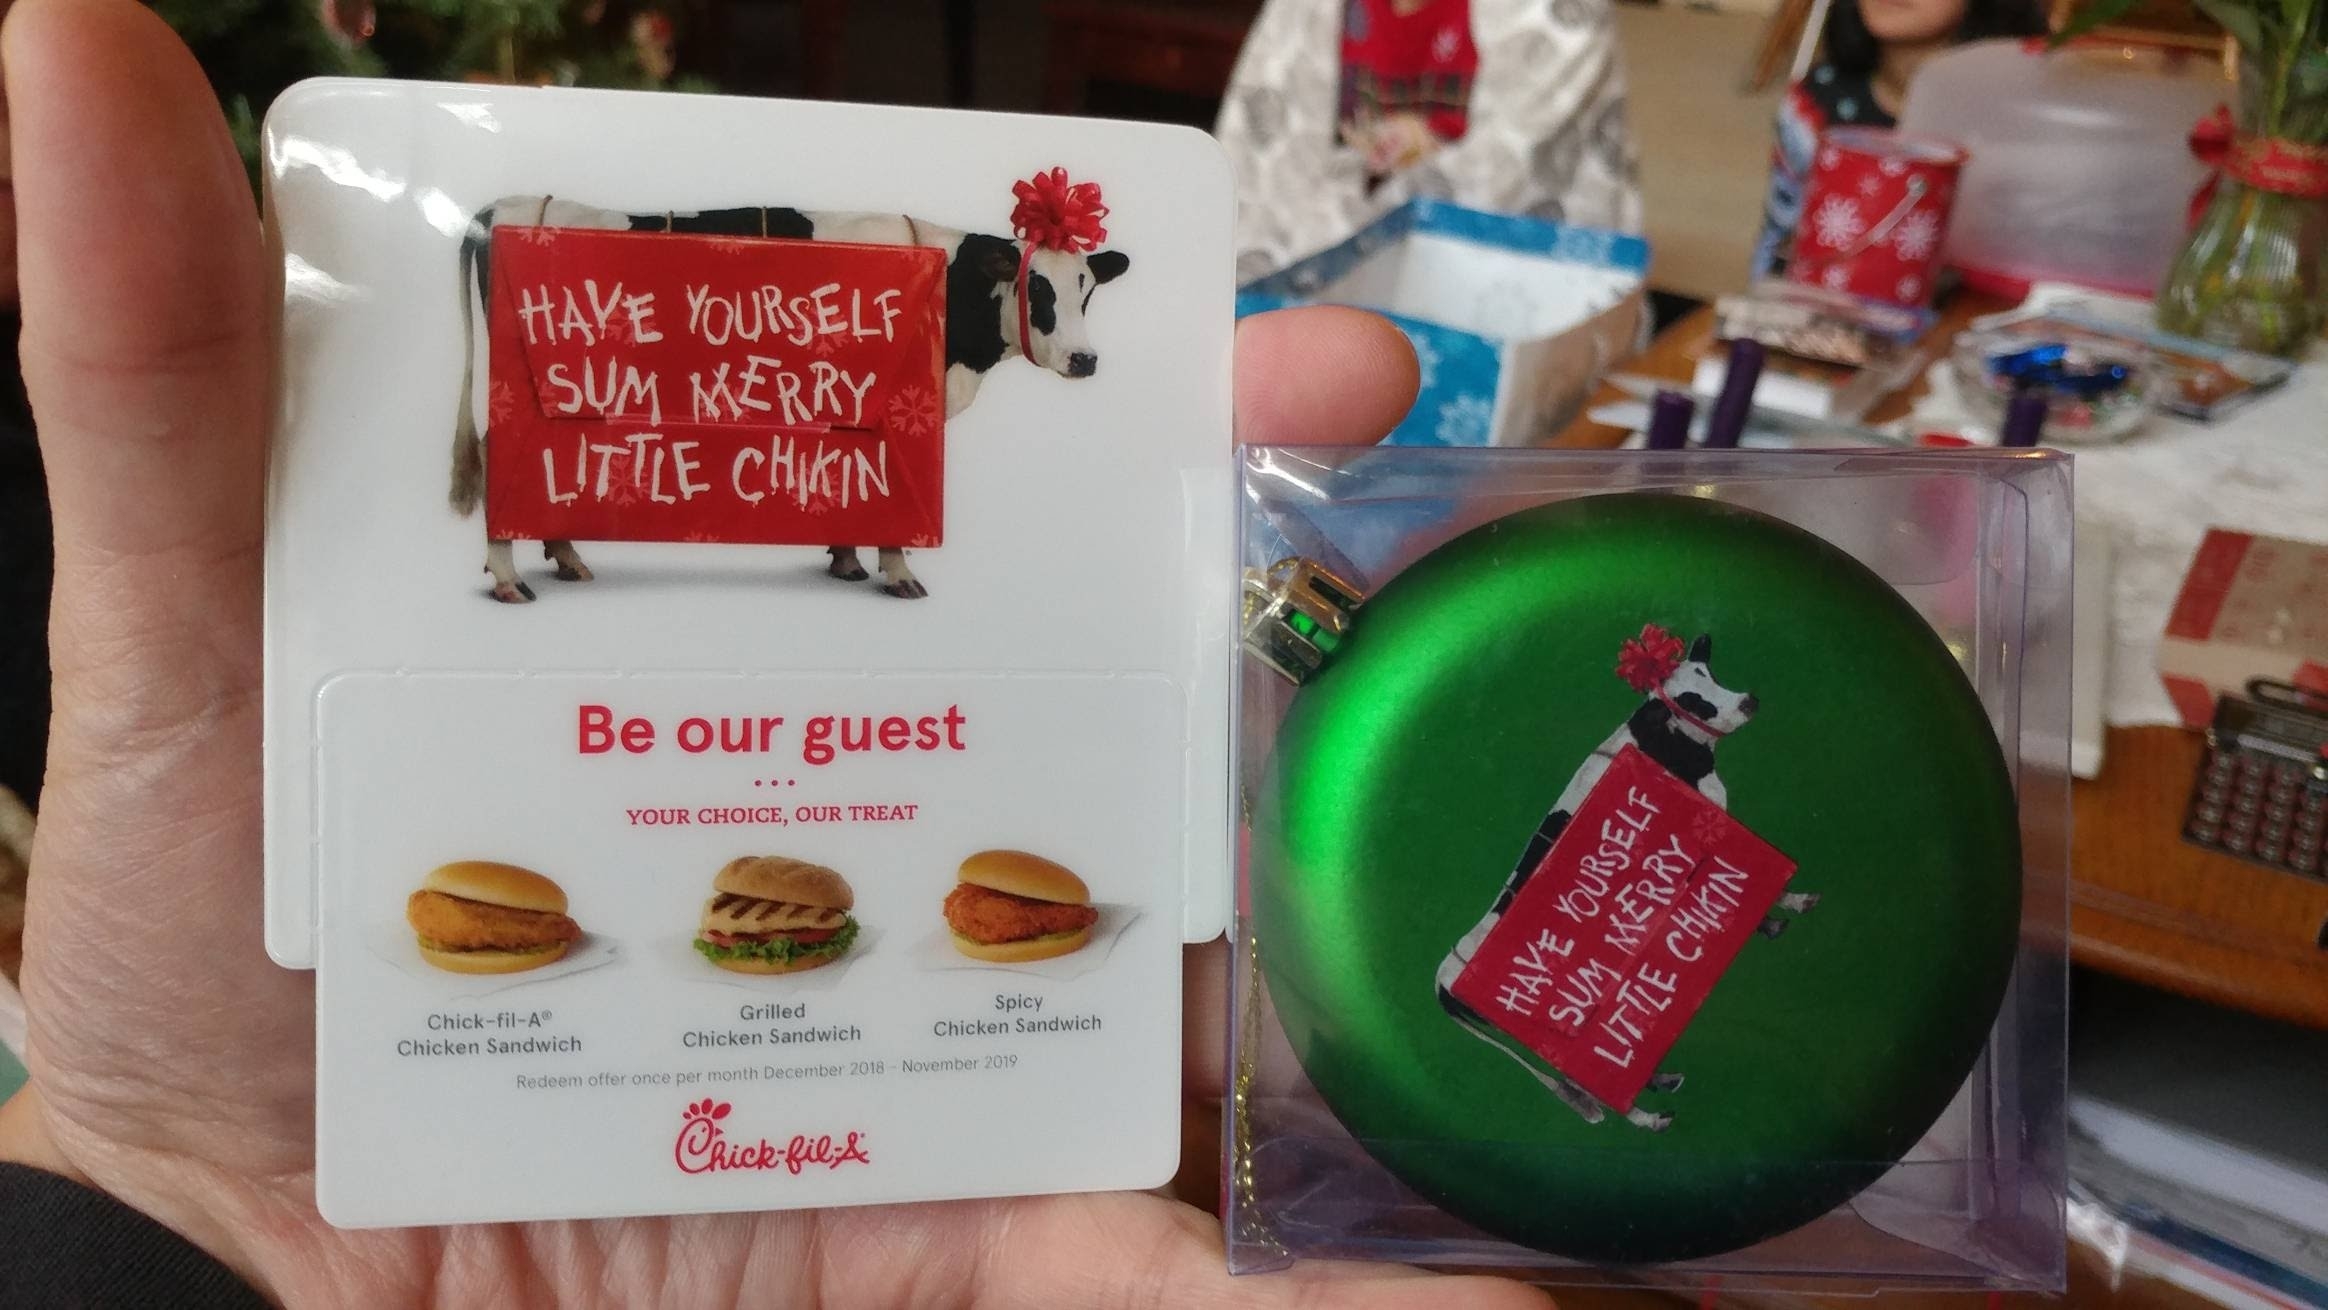 I Received This Chick-Fil-A Ornament And Gift Card For within Chick A Fil Ornament Calendar